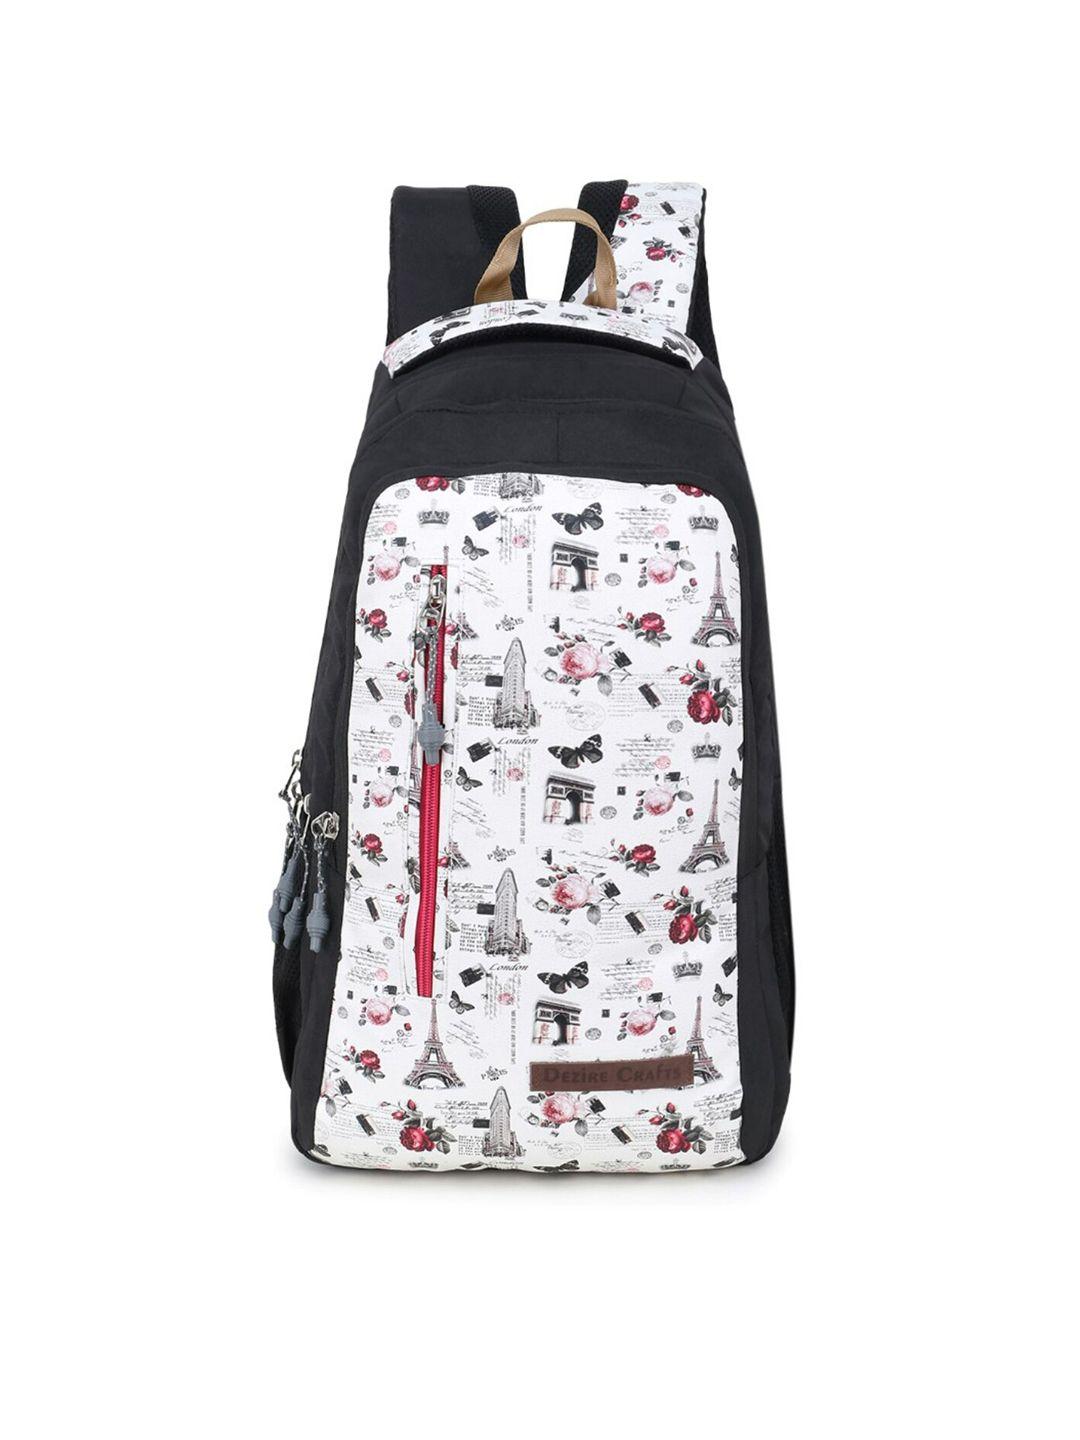 dezire crafts unisex graphic printed water resistant backpack